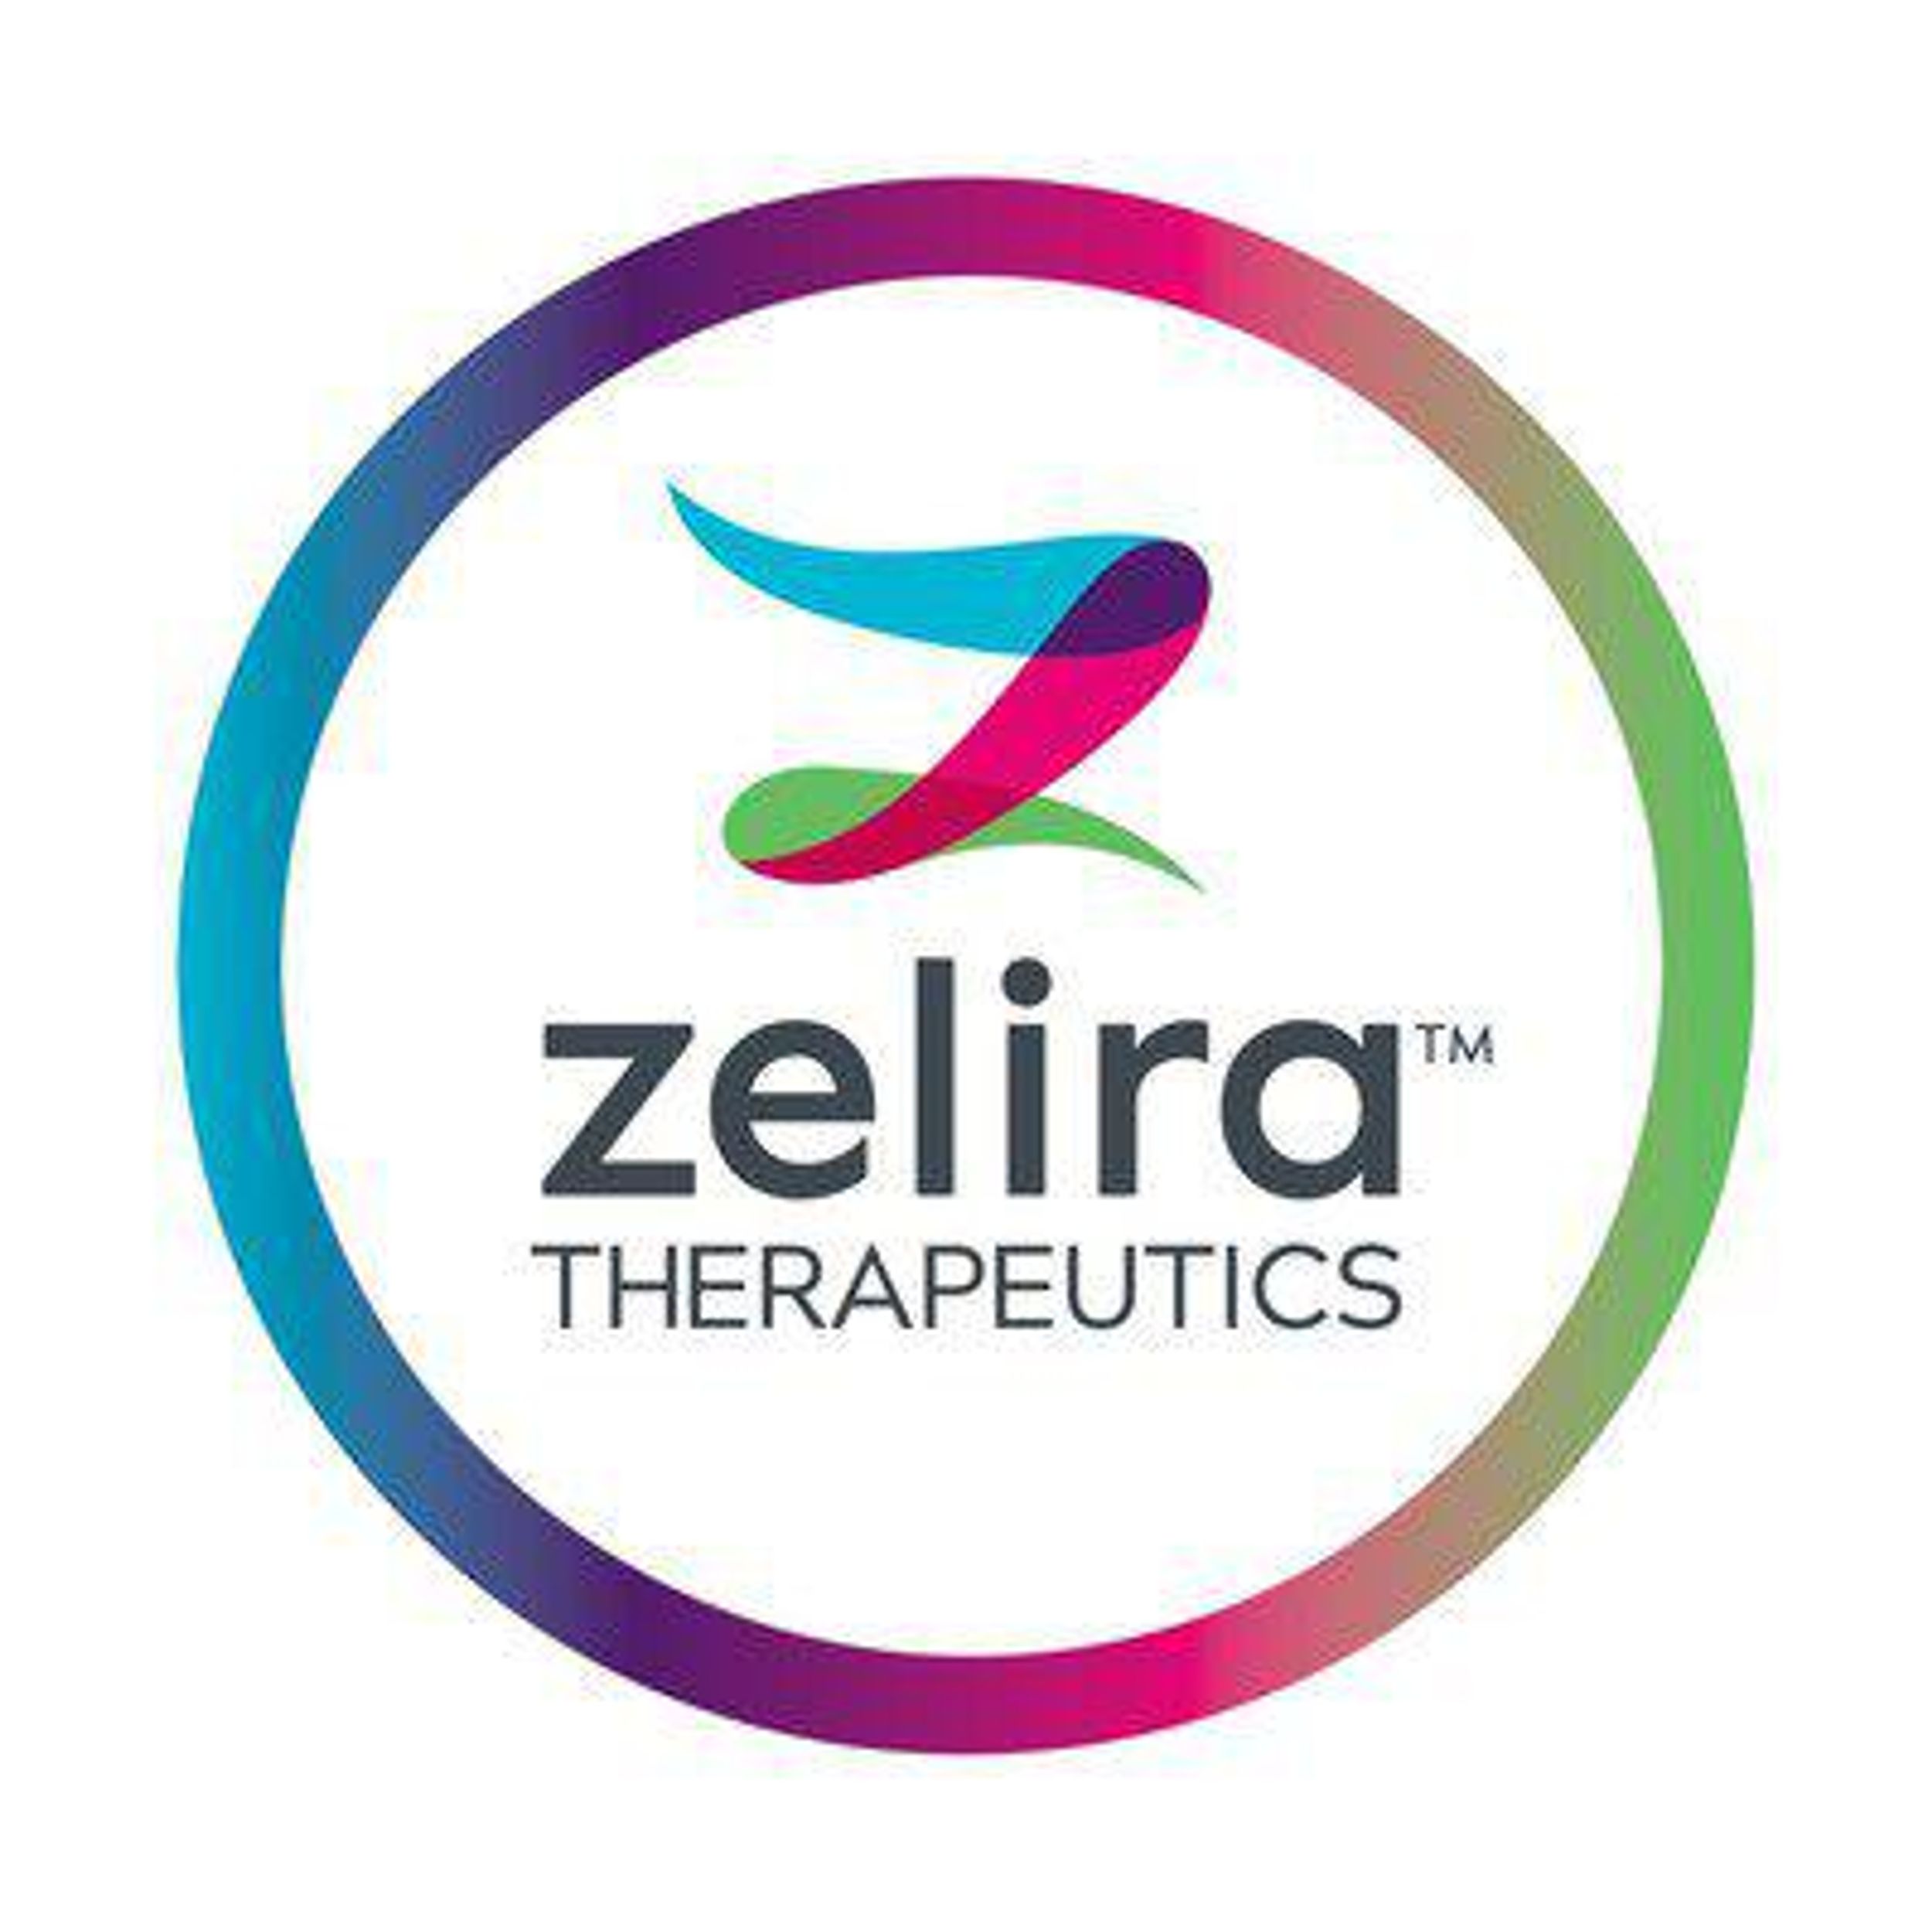 Zelira Launches RAF FIVE Acne Treatment Products Through Its Dermatology Focused Subsidiary